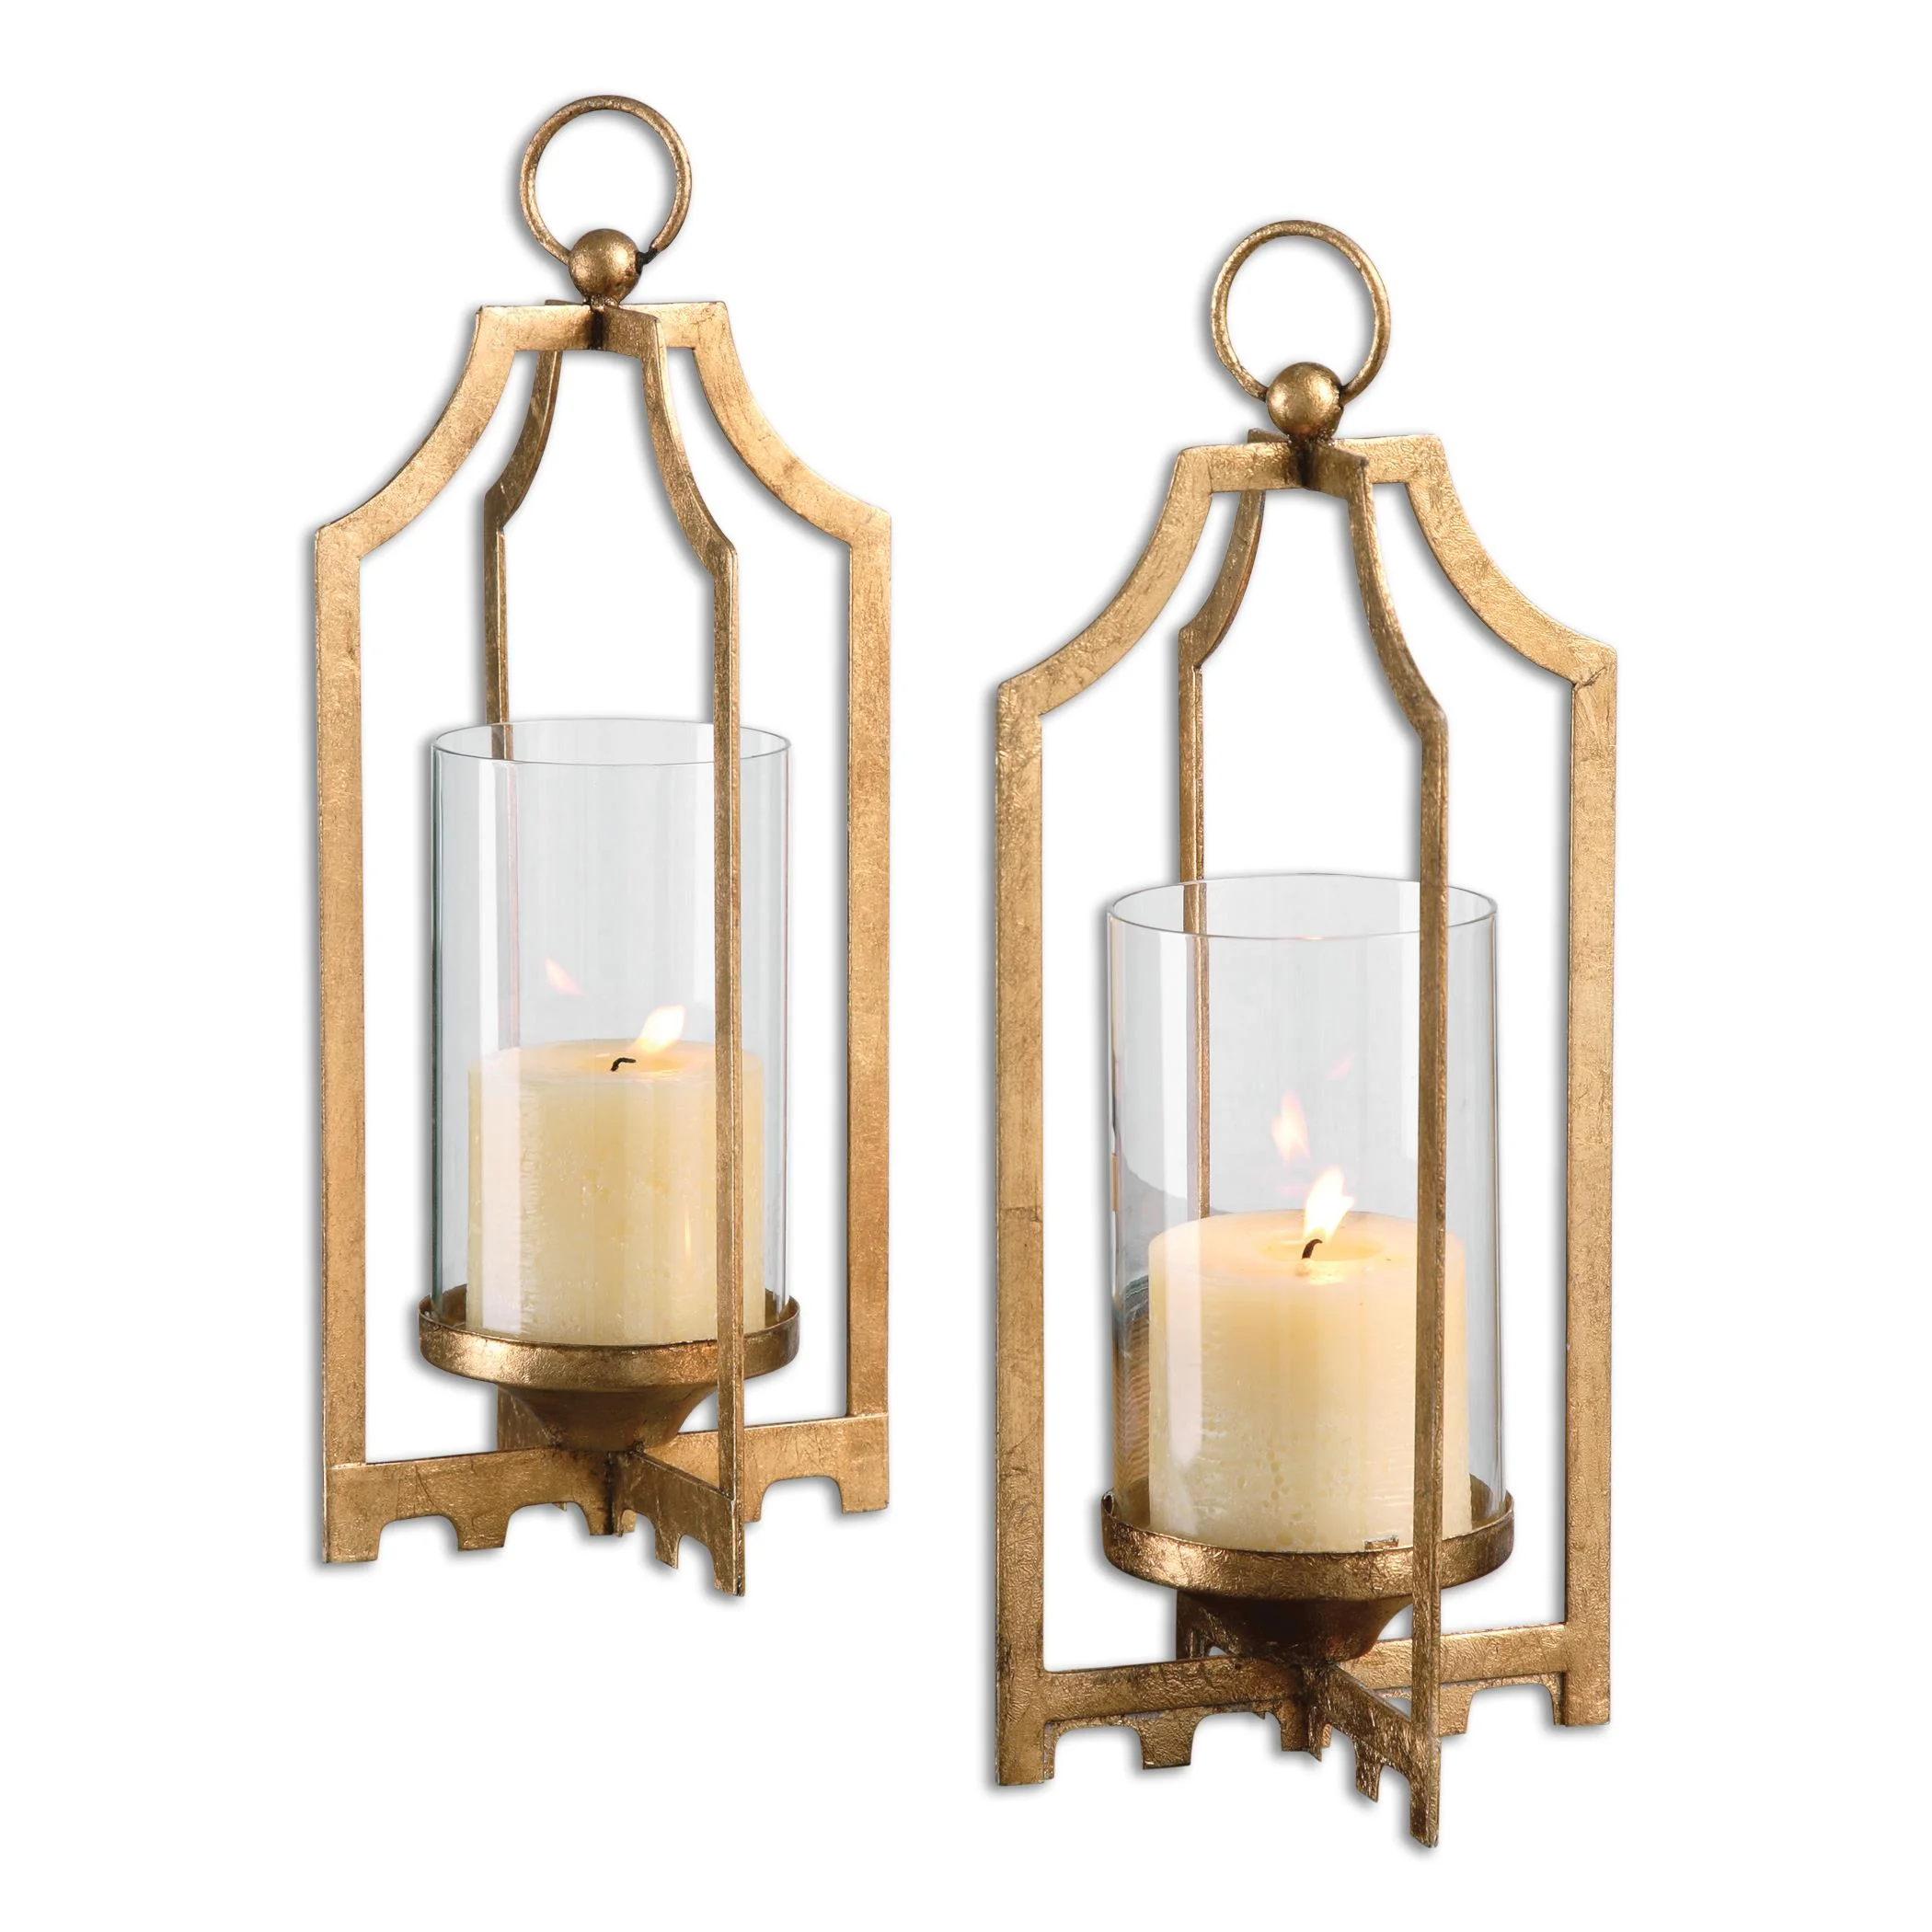 & Uttermost Candle Holders - Mattress | 19957 Lucy Accessories Furniture Holders Gold | Candle Accessories S/2 Wayside - Candleholders